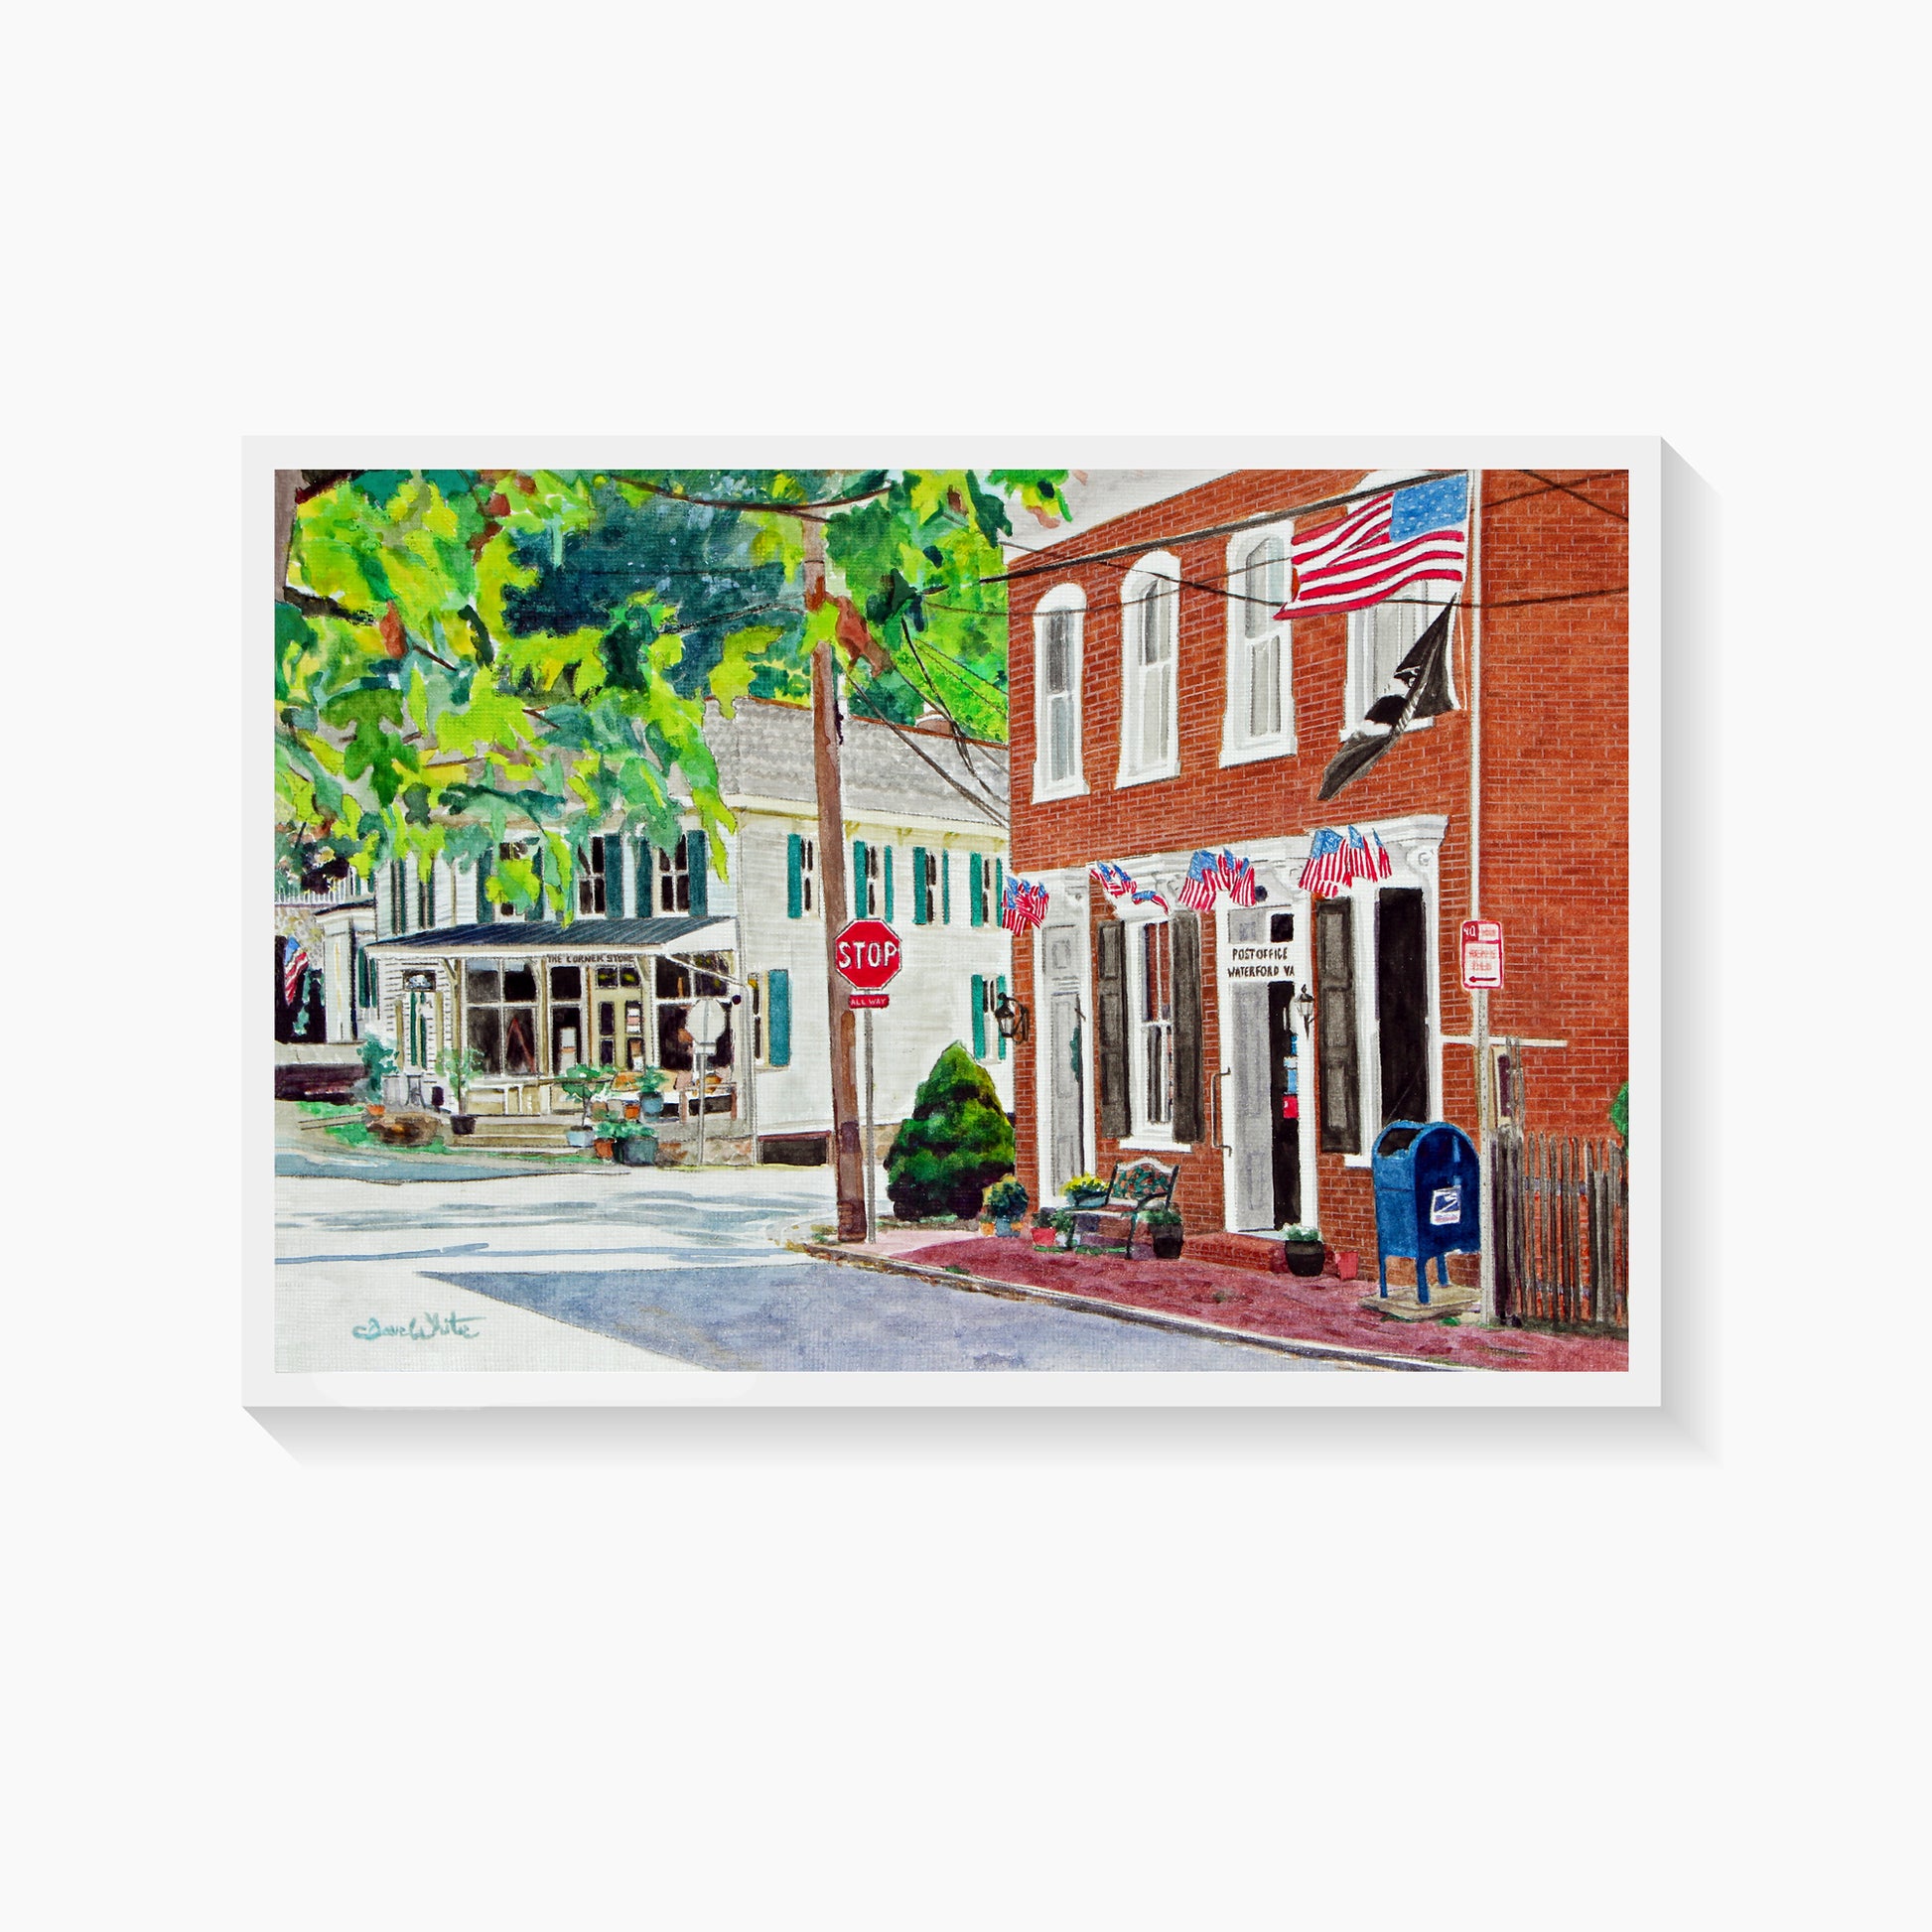 Waterford Virginia Art Print Post Office Painting by Loudoun County Artist Dave White